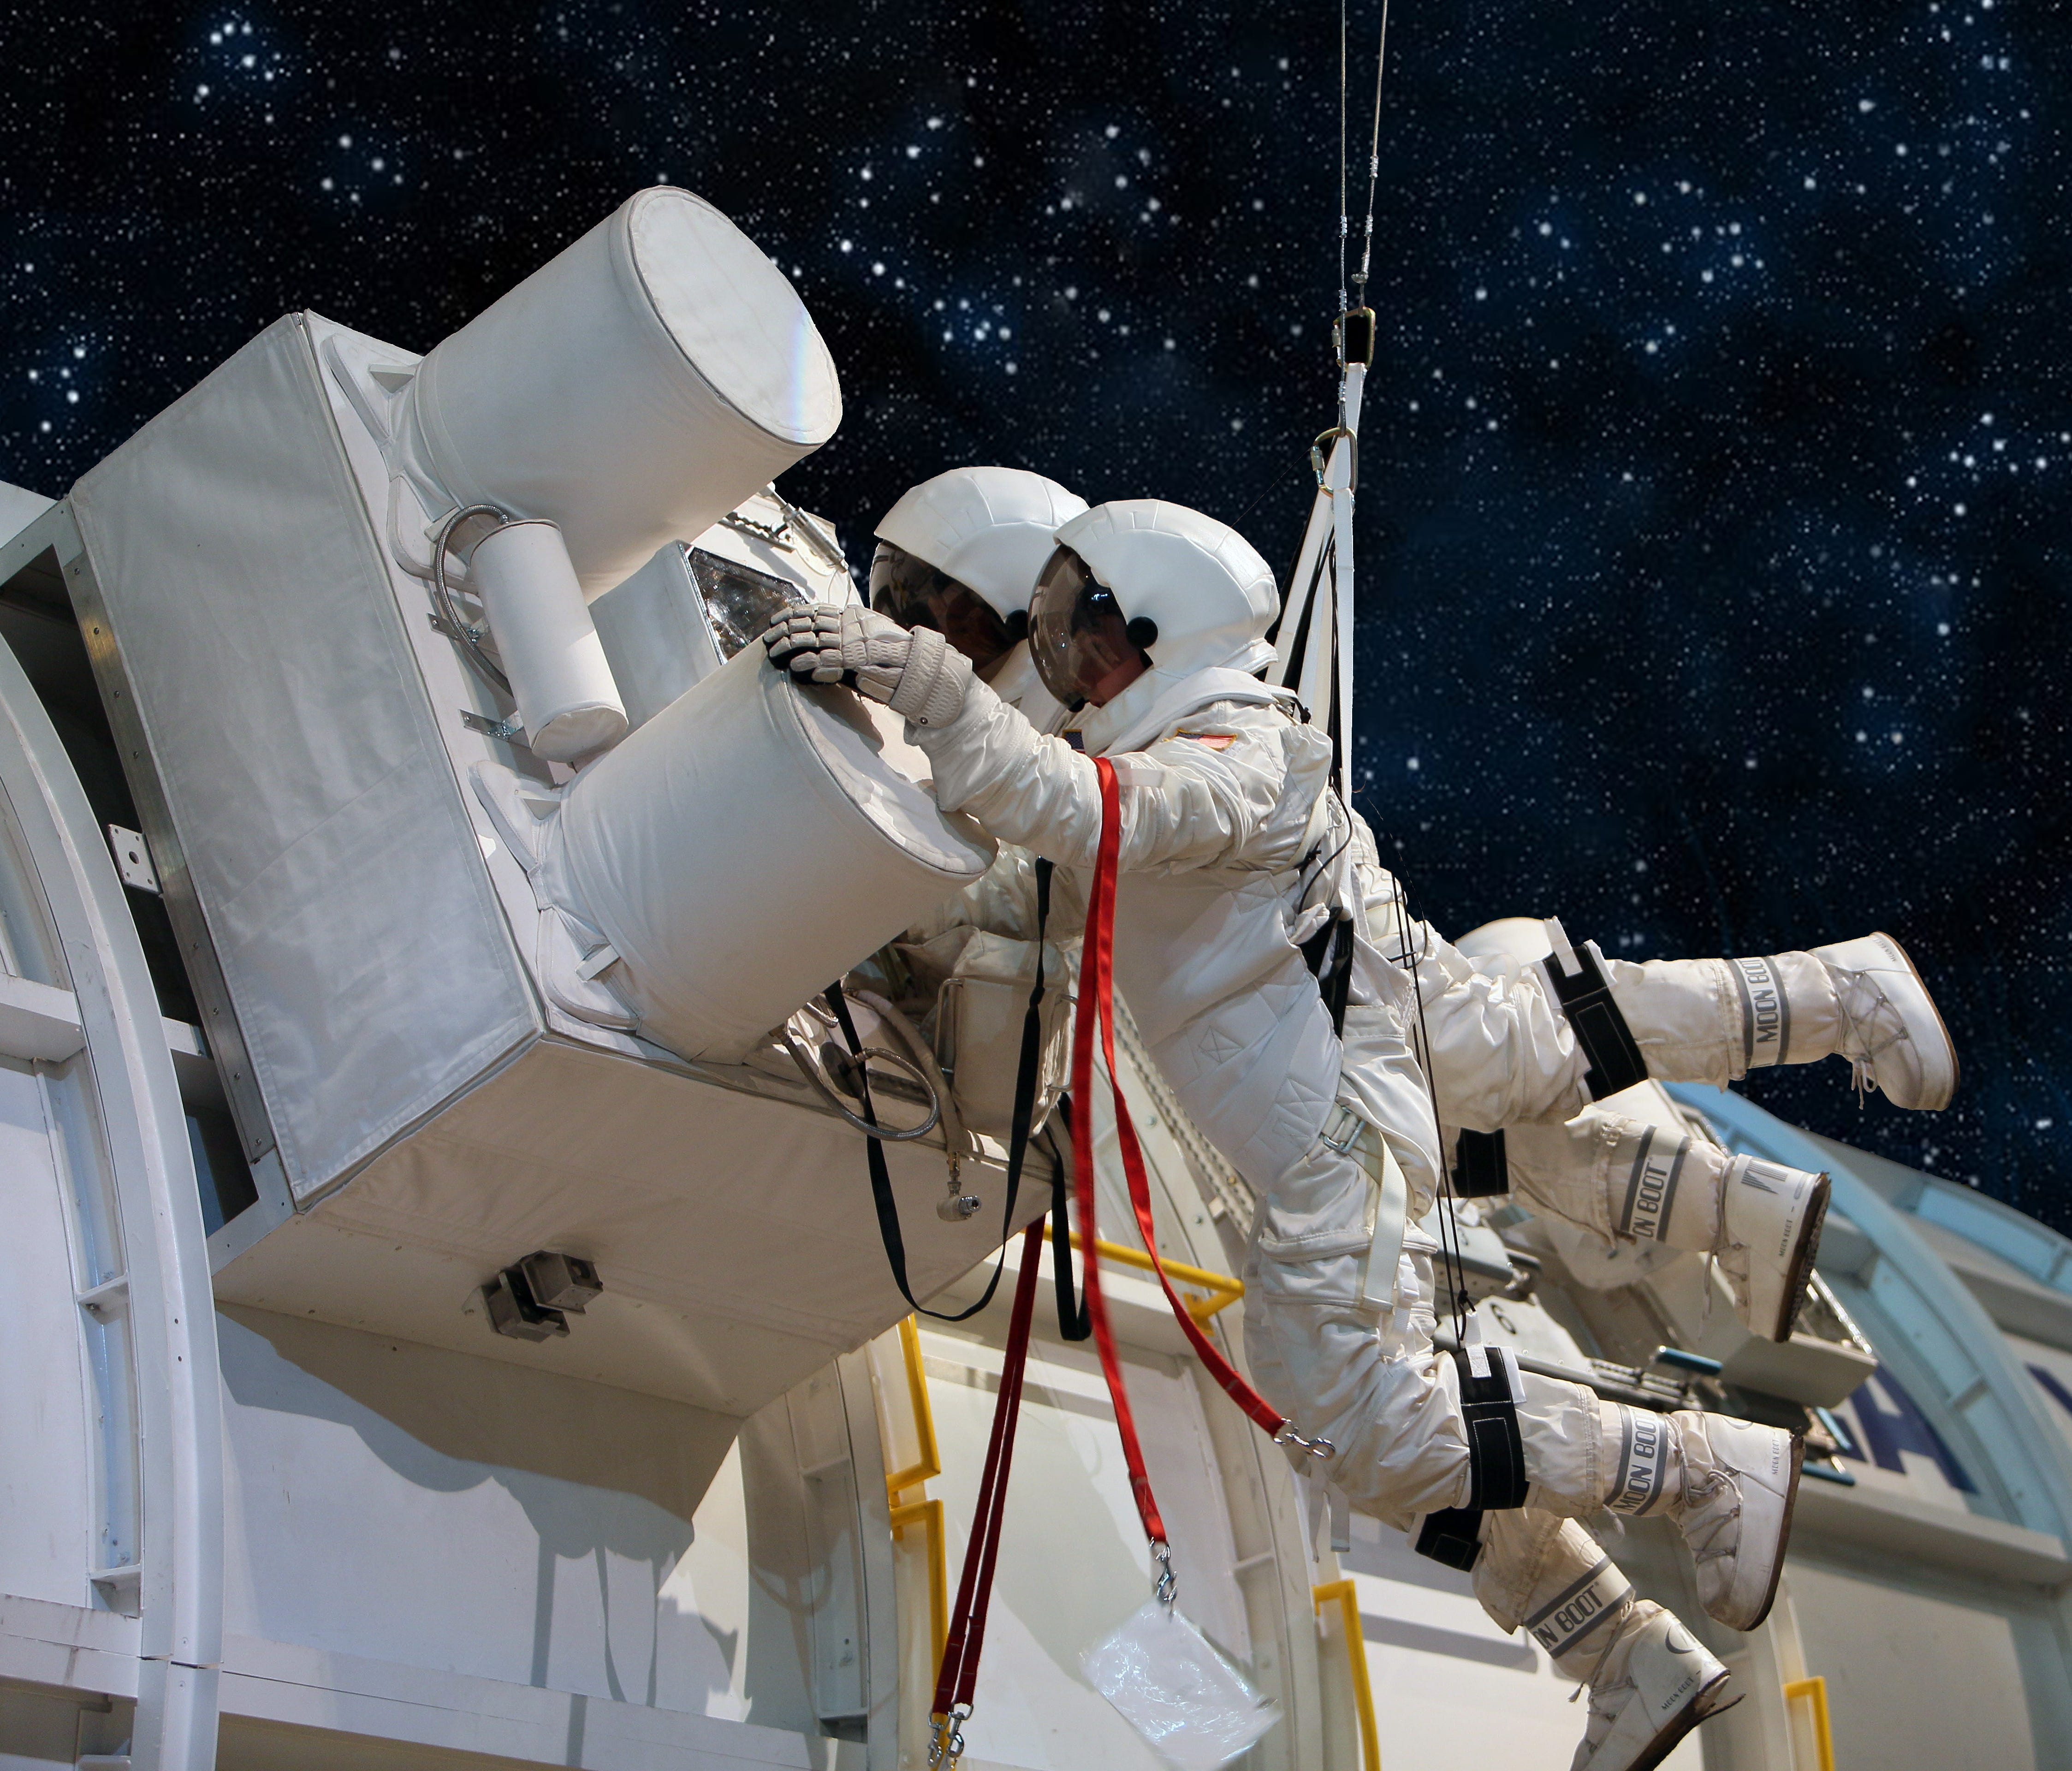 Mission specialists perform a critical Extravehicular Activity, or spacewalk, to repair an ammonium tank on the International Space Station.